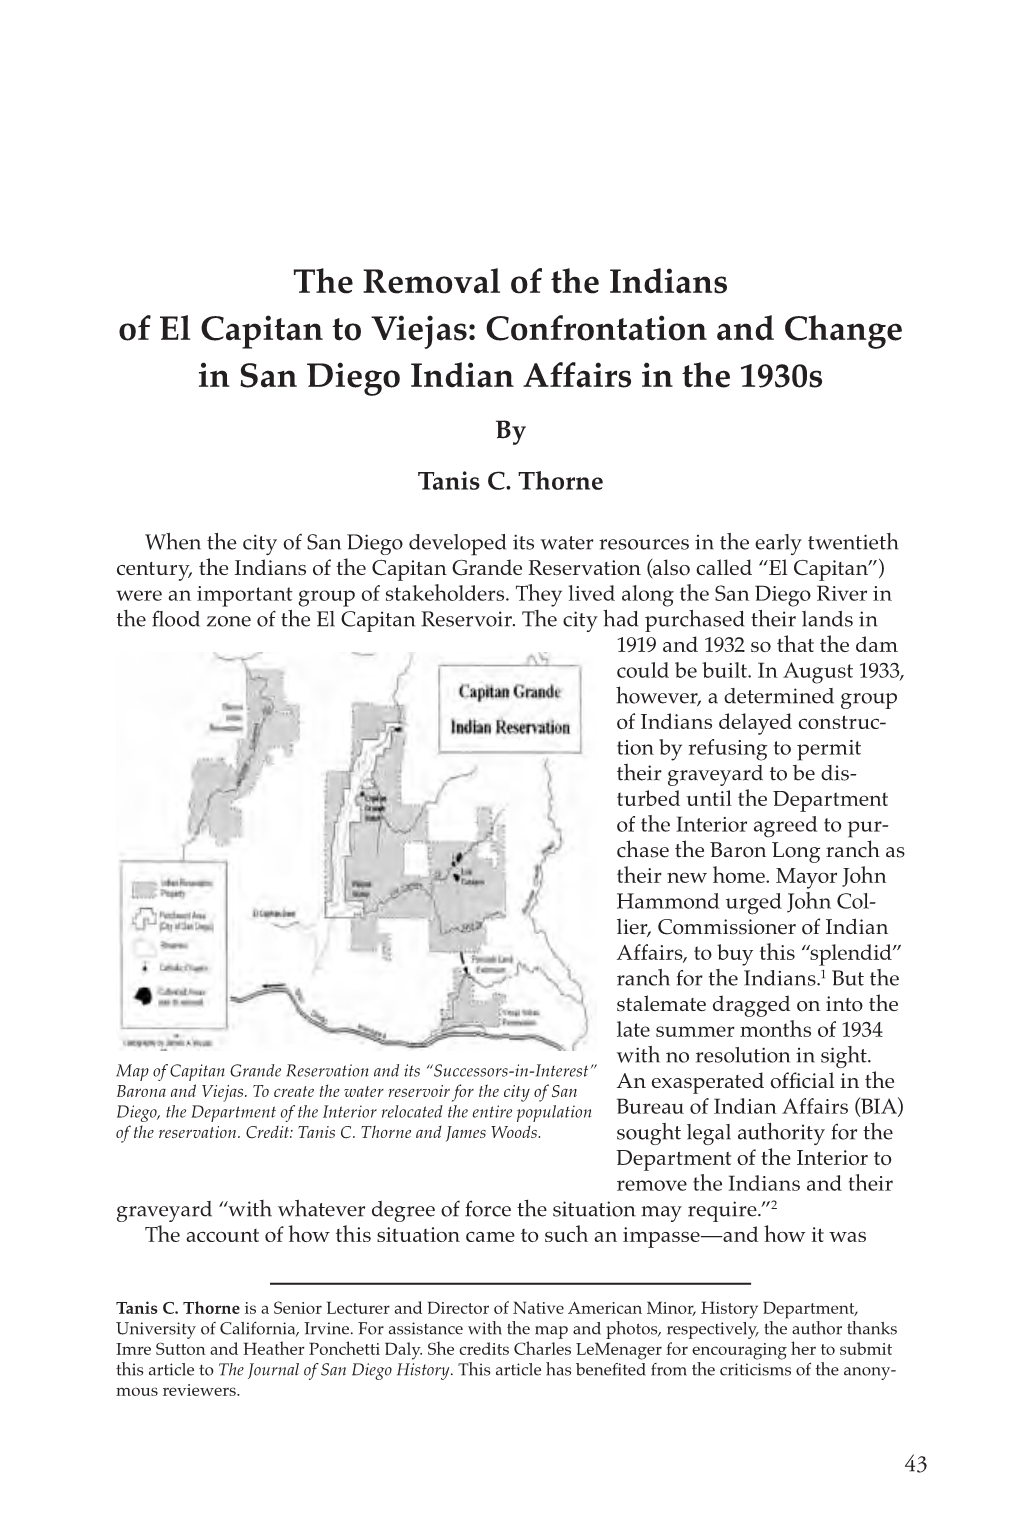 The Removal of the Indians of El Capitan to Viejas: Confrontation and Change in San Diego Indian Affairs in the 1930S by Tanis C